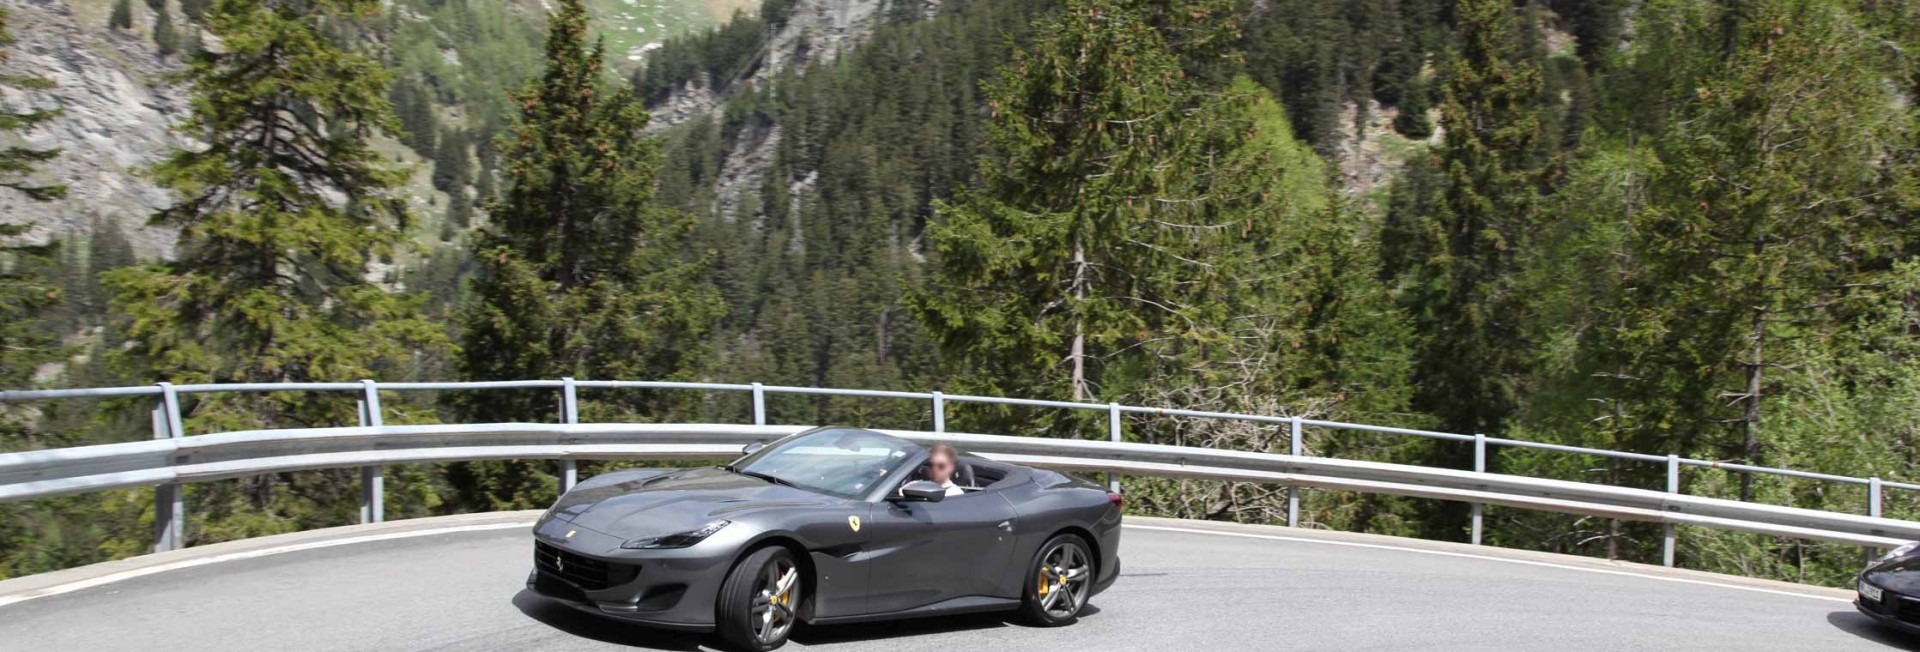 drive in motion Sports Car Tour Italy Alpine Roads